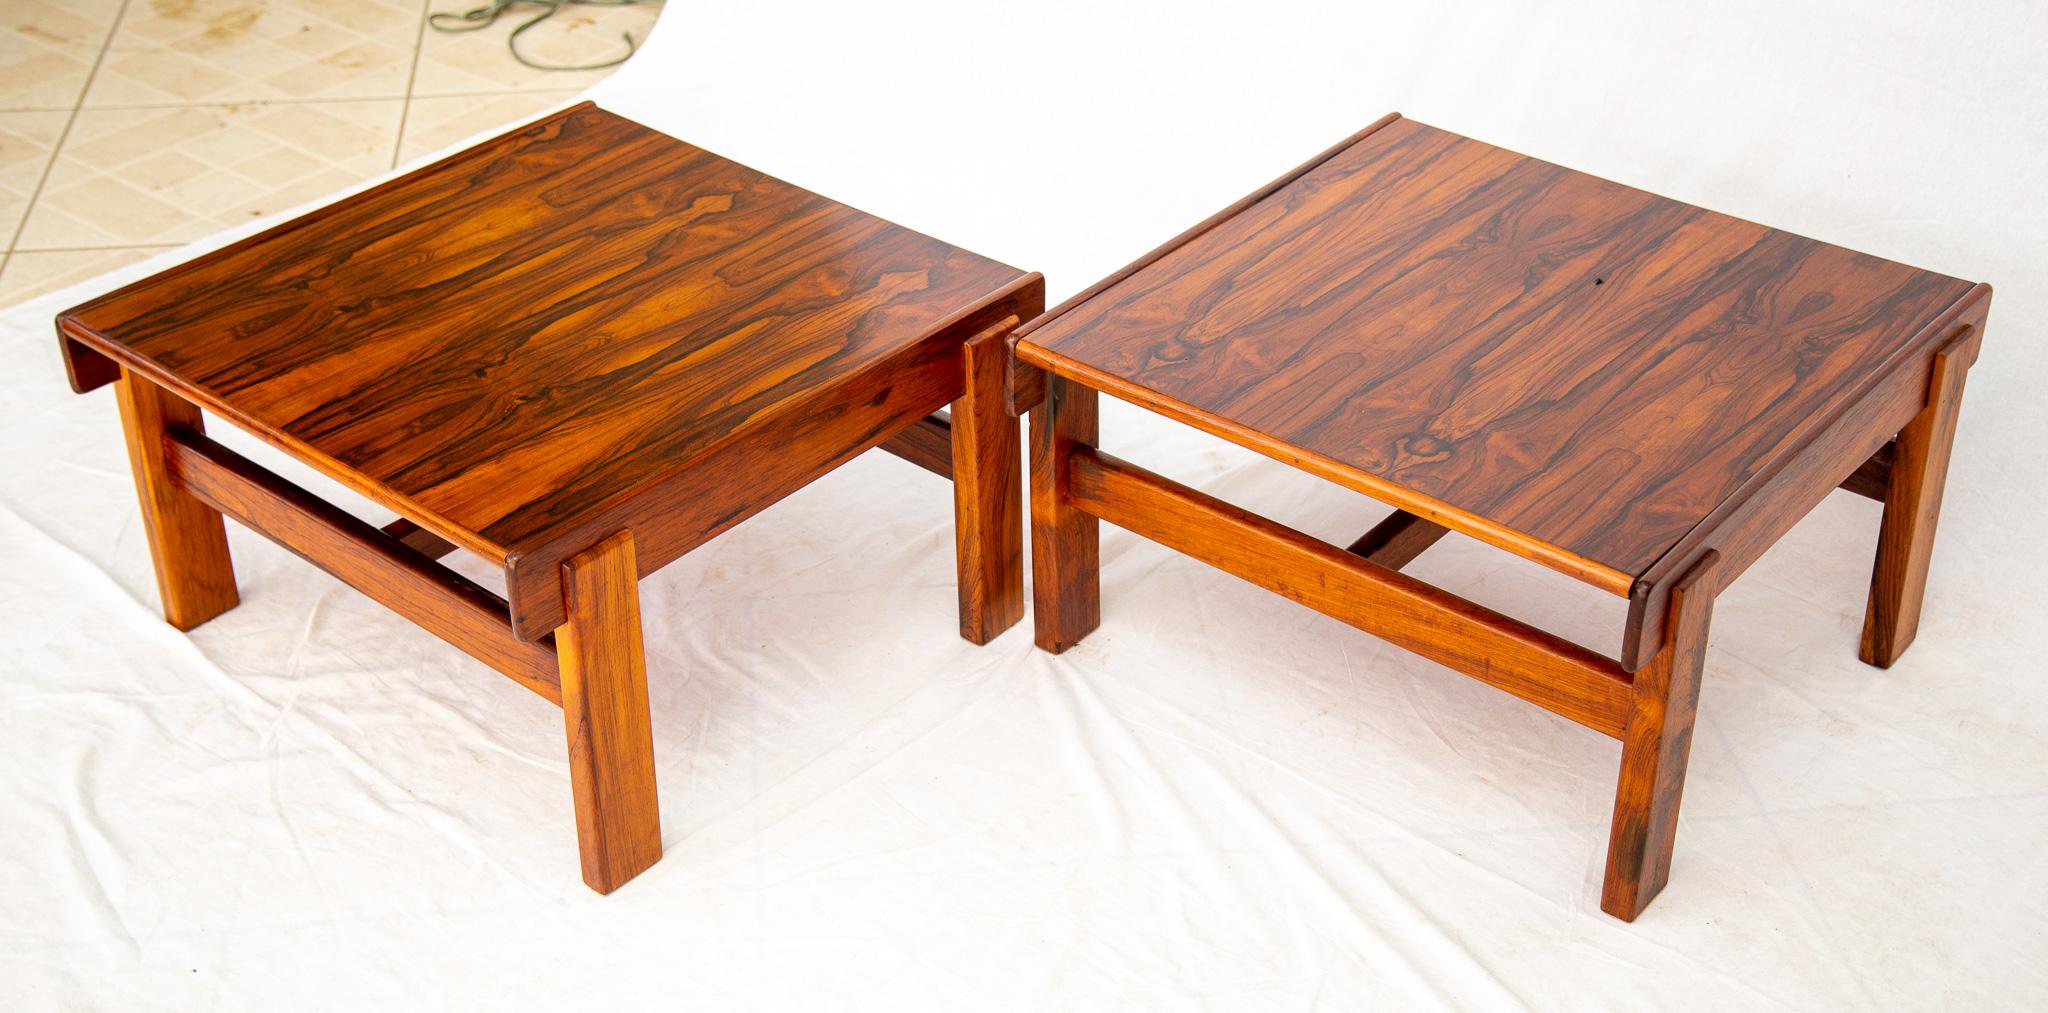 Midcentury Modern Side Table set in Hardwood by Jean Gillon, 1960s For Sale 6